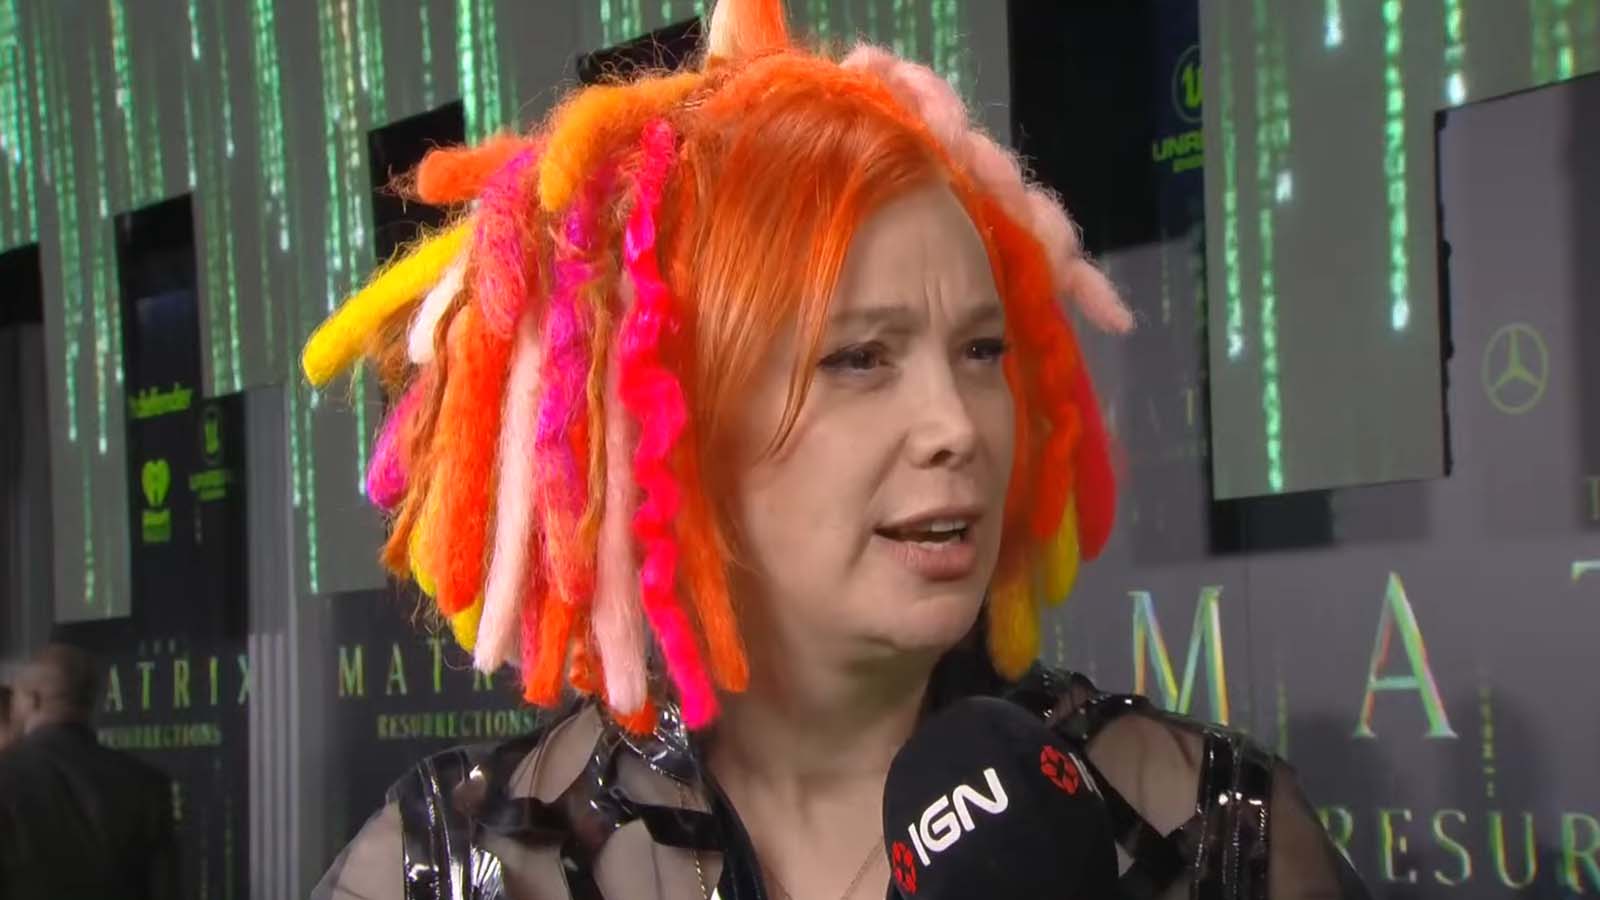 Director/writer Lana Wachowski on the red carpet for the premiere of The Matrix Resurrections. Image © Warner Bros Pictures